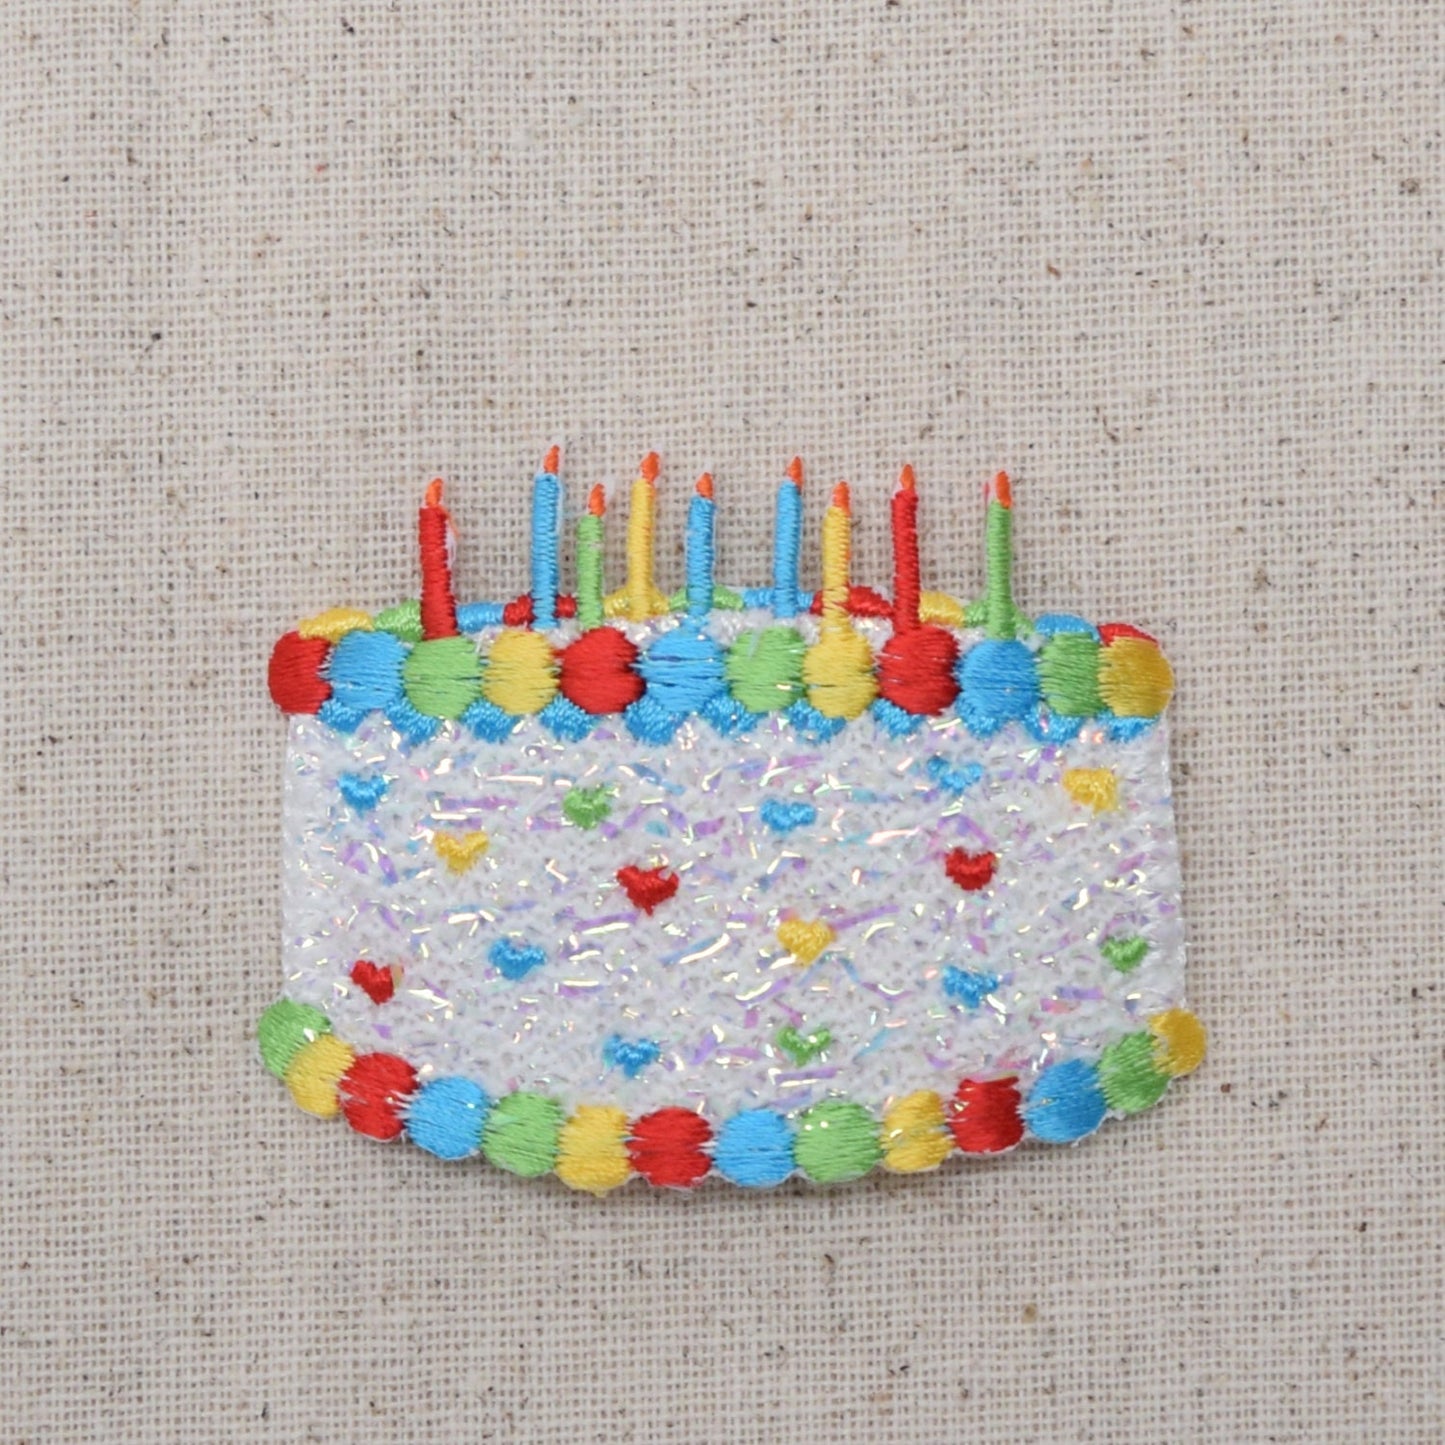 Birthday Cake with Candles - PINK or WHITE - Confetti Shimmery - Embroidered Patch - Iron on Applique - 694007